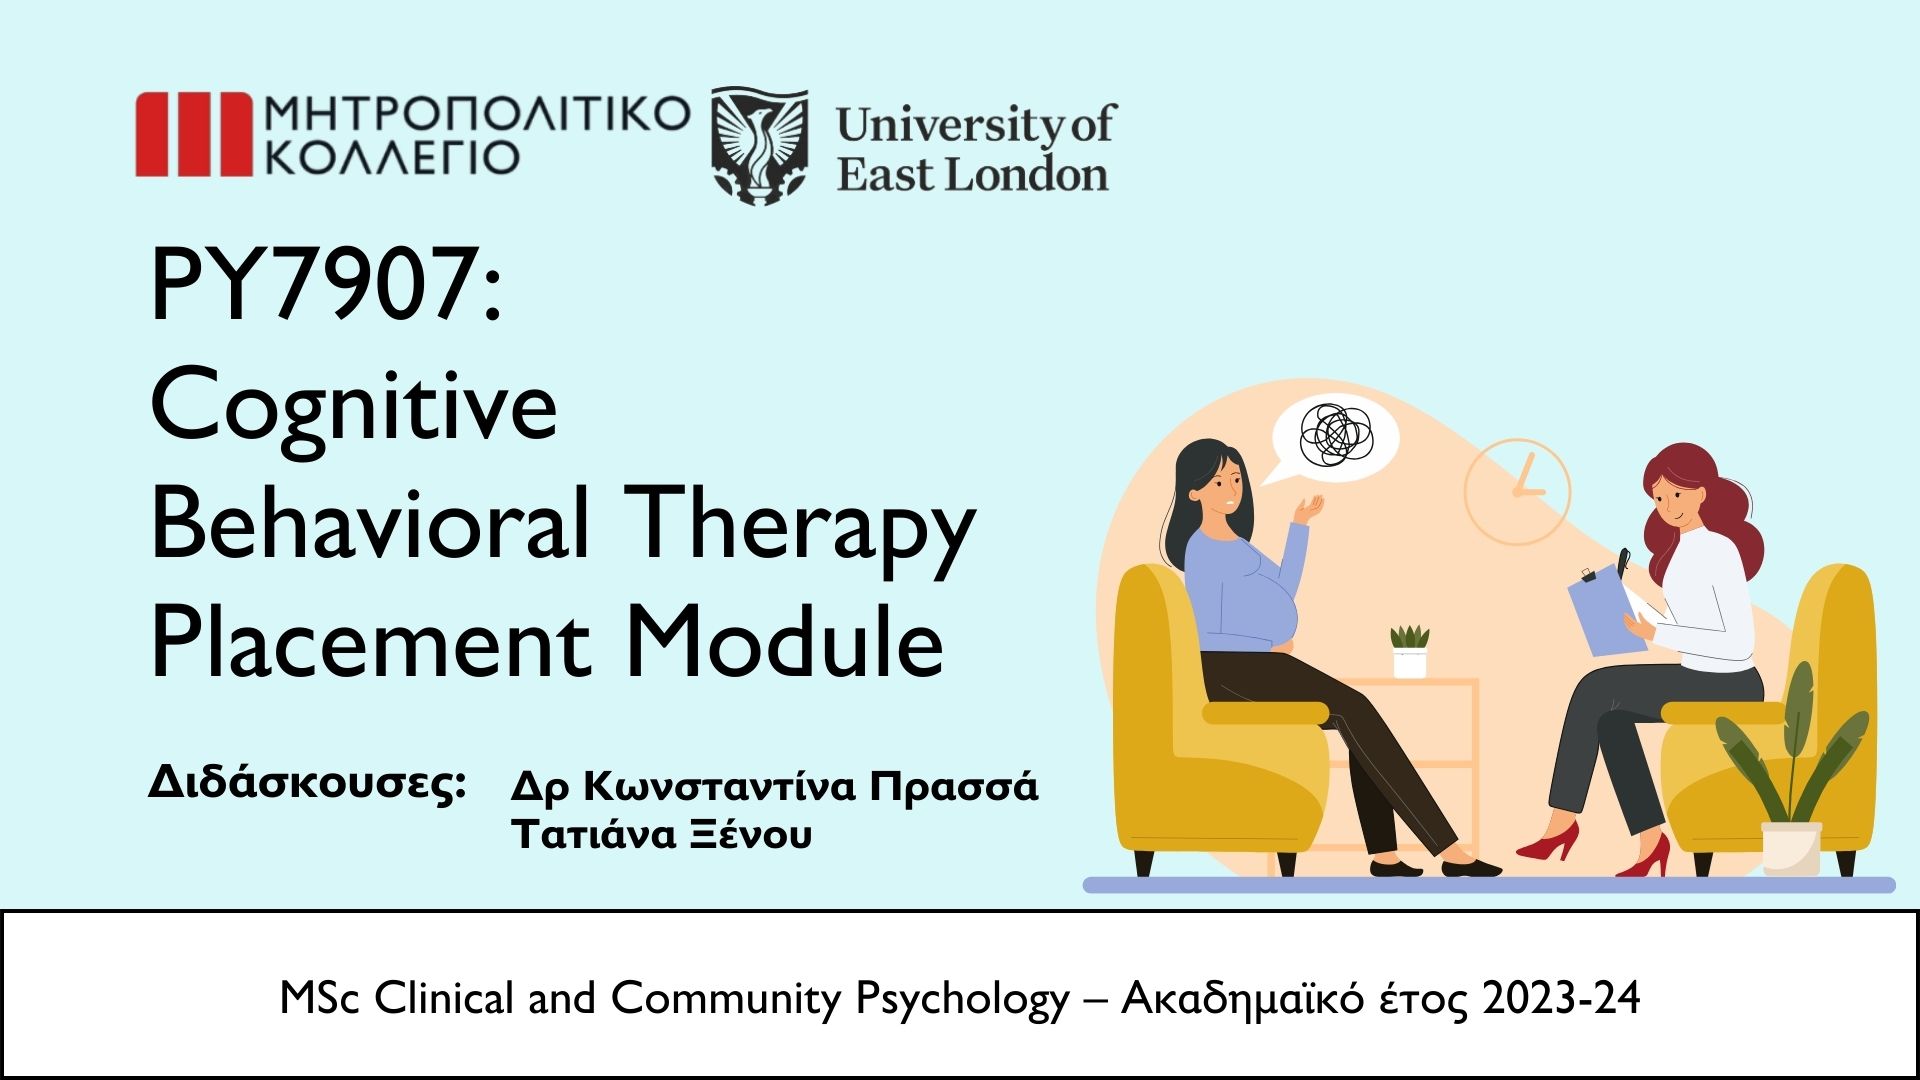 COGNITIVE BEHAVIORAL THERAPY PLACEMENT MODULE (PY7907_1)